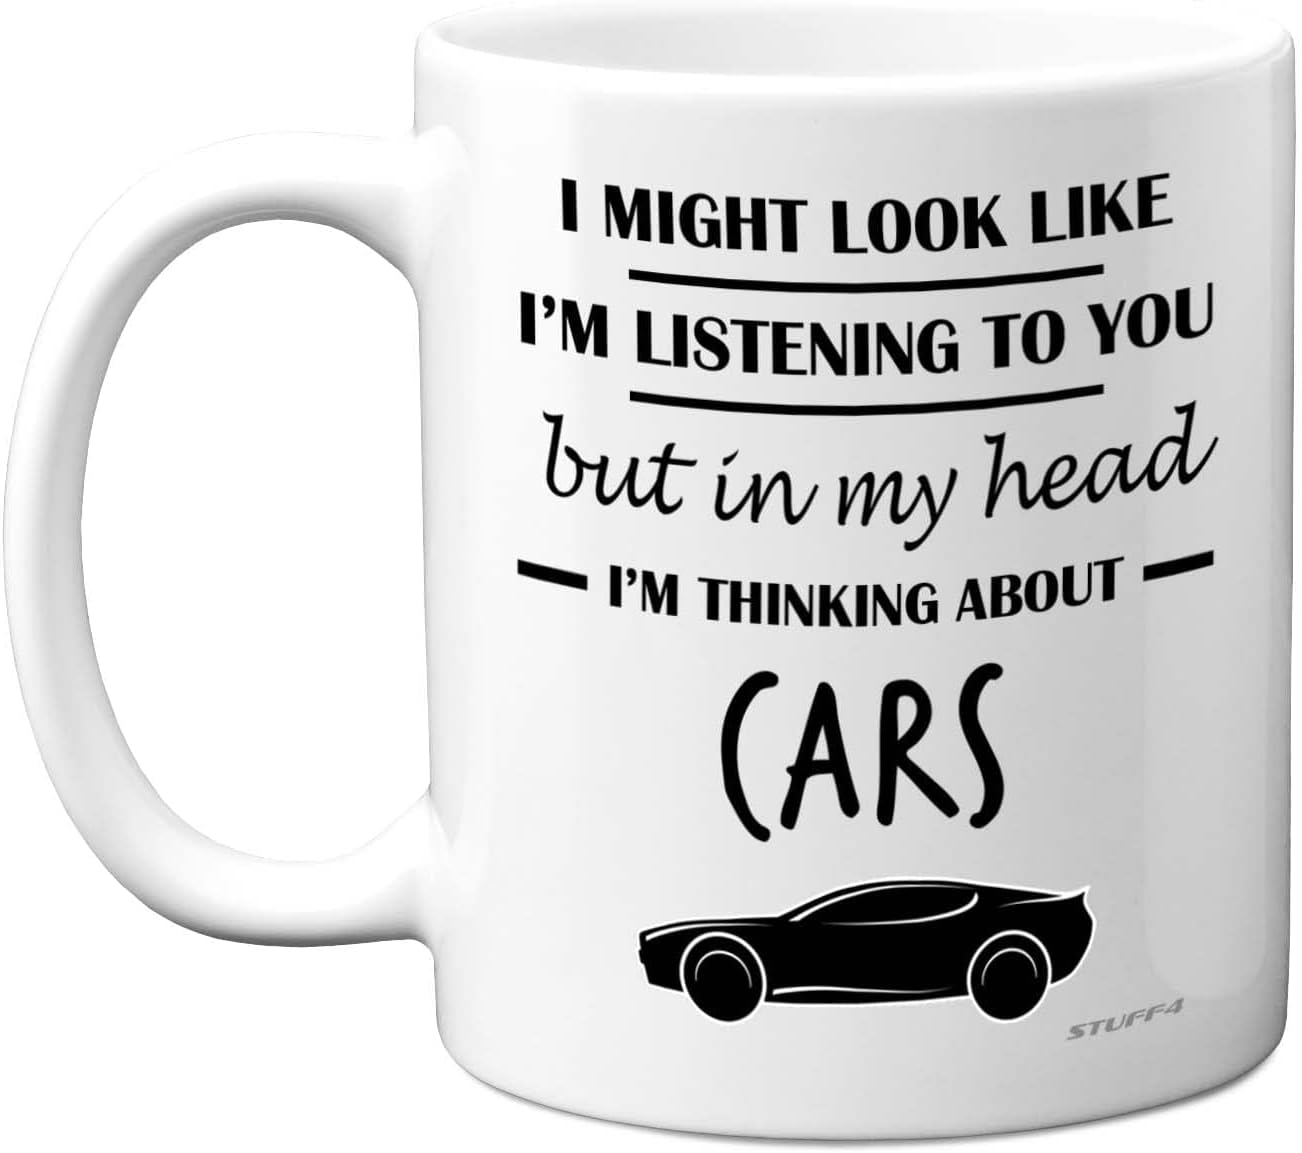 Stuff4 Gifts for Car Enthusiasts - in My Head I'm Thinking About Cars - Funny Classic Car Mug, Gifts for Cars Lovers, Petrol Head Gifts, 11oz Ceramic Dishwasher Safe Premium Mugs Cup